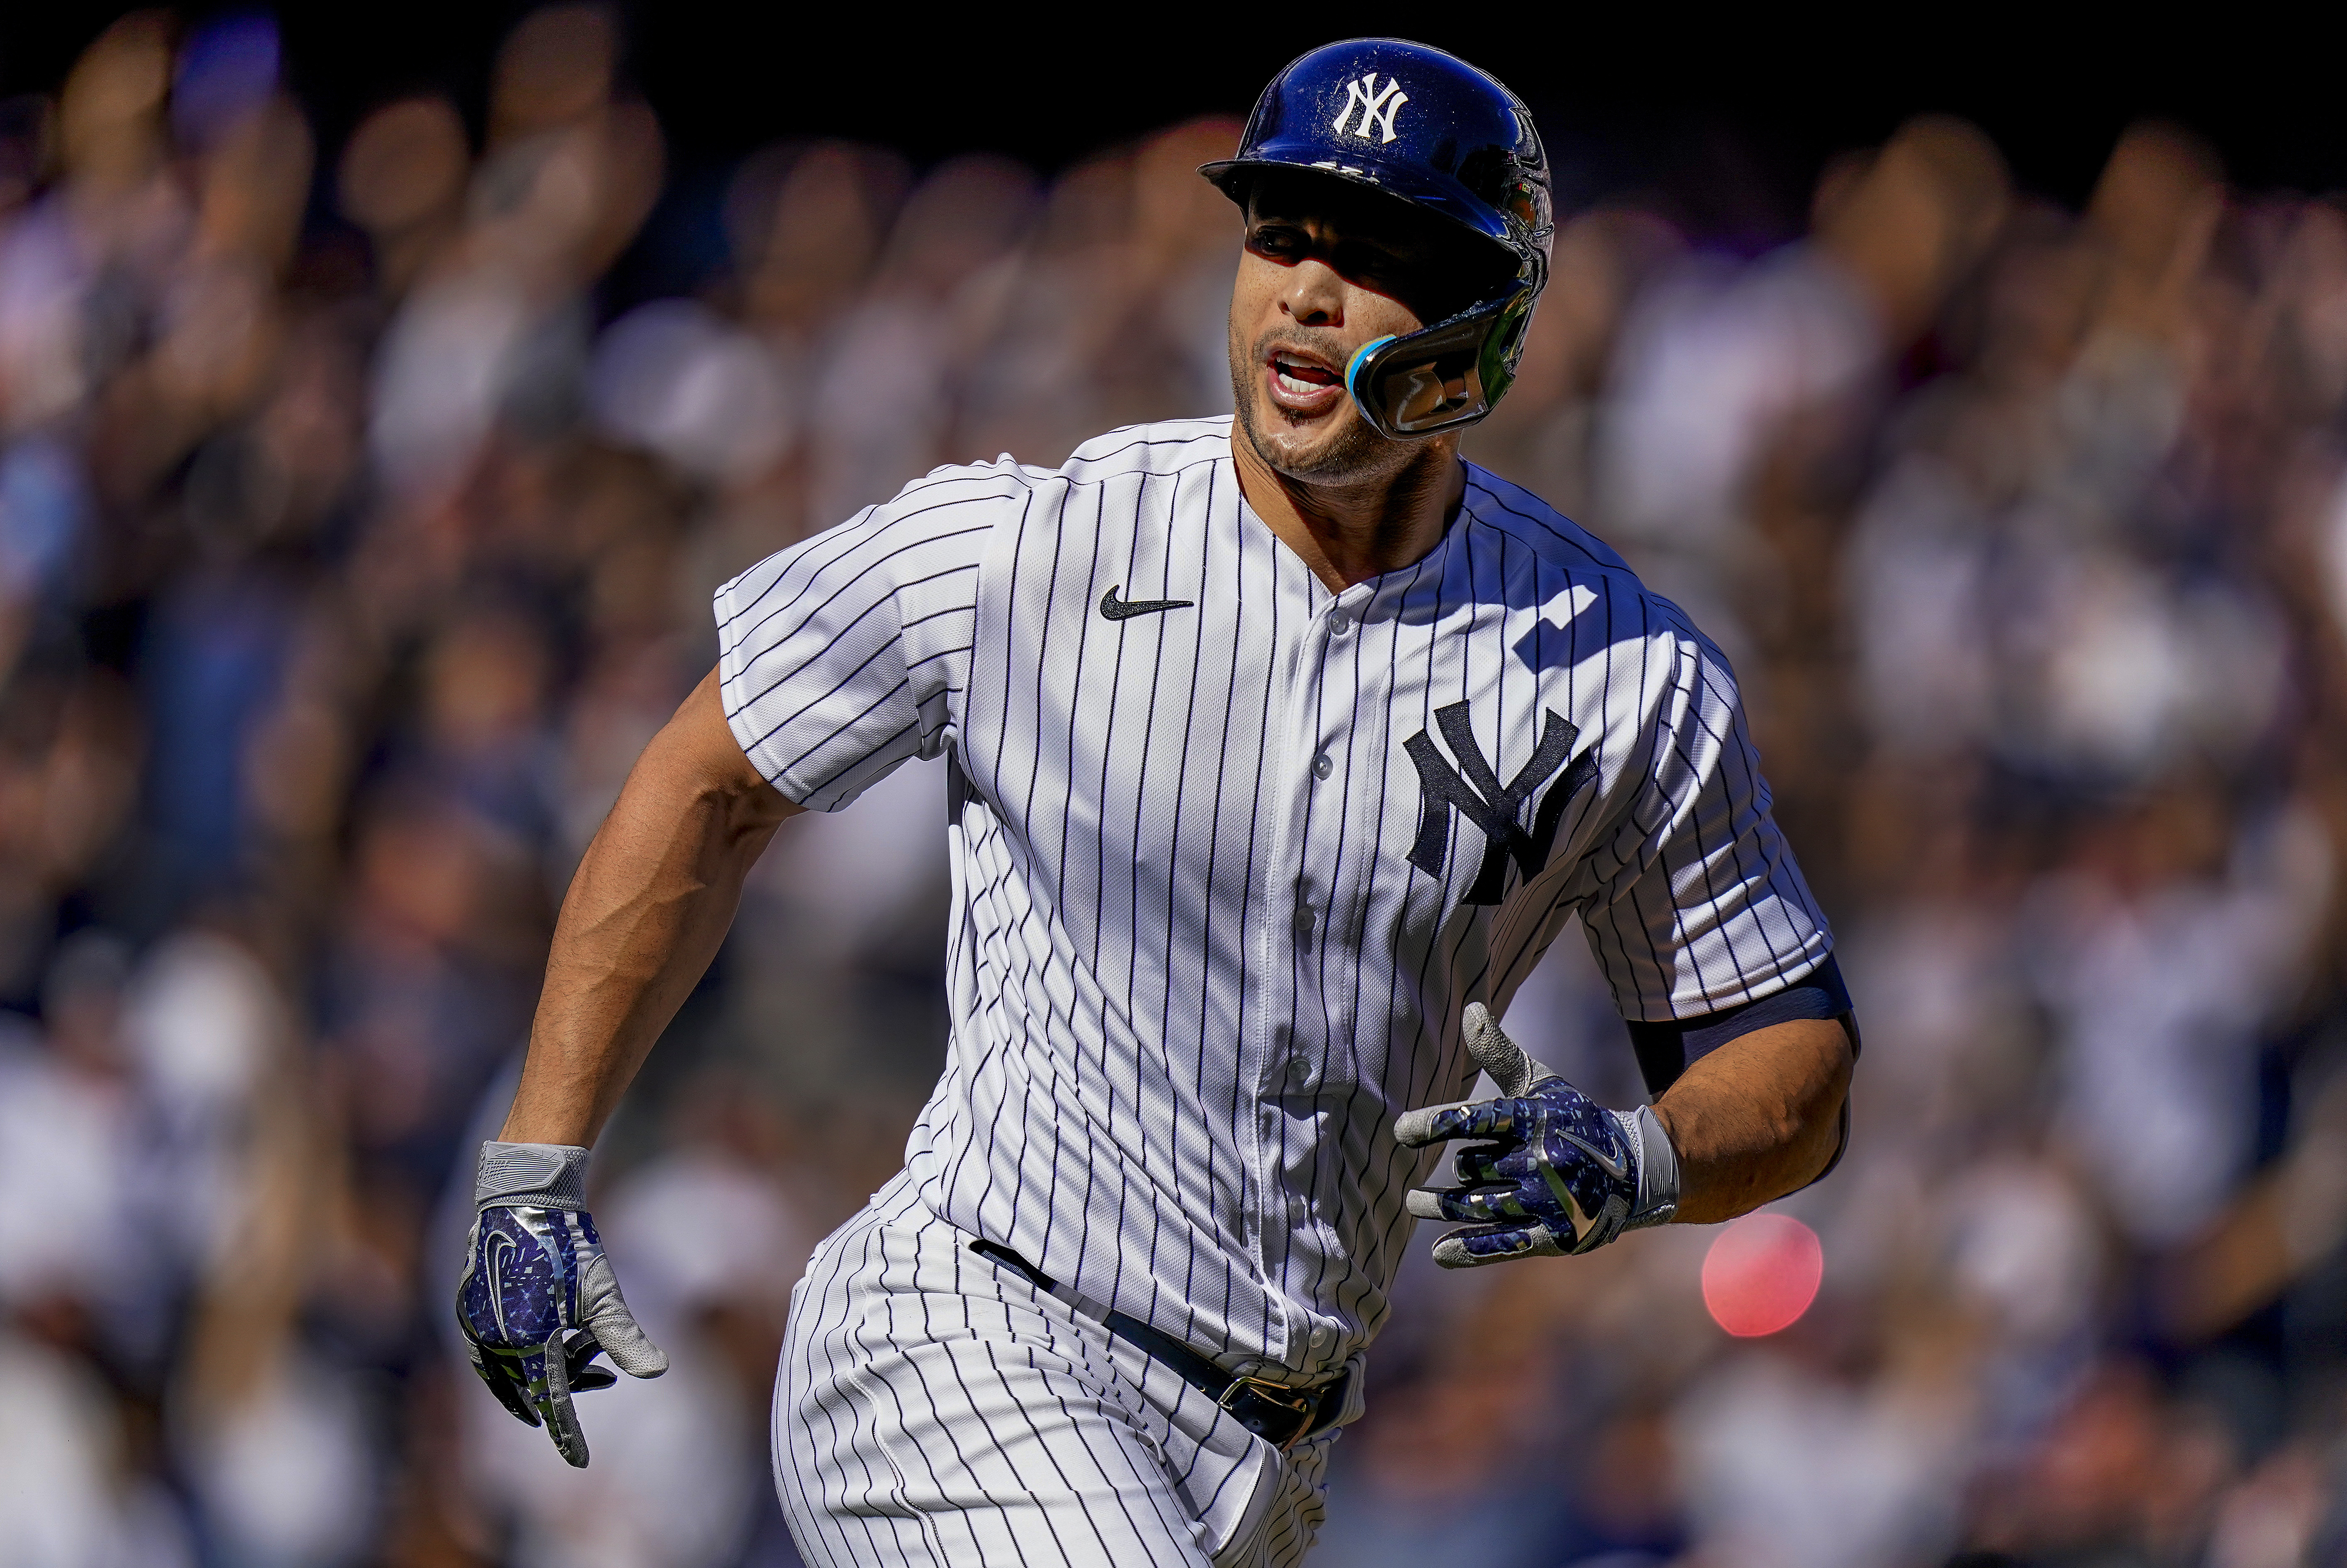 Yankees' Giancarlo Stanton on injuries: 'It's unacceptable this often